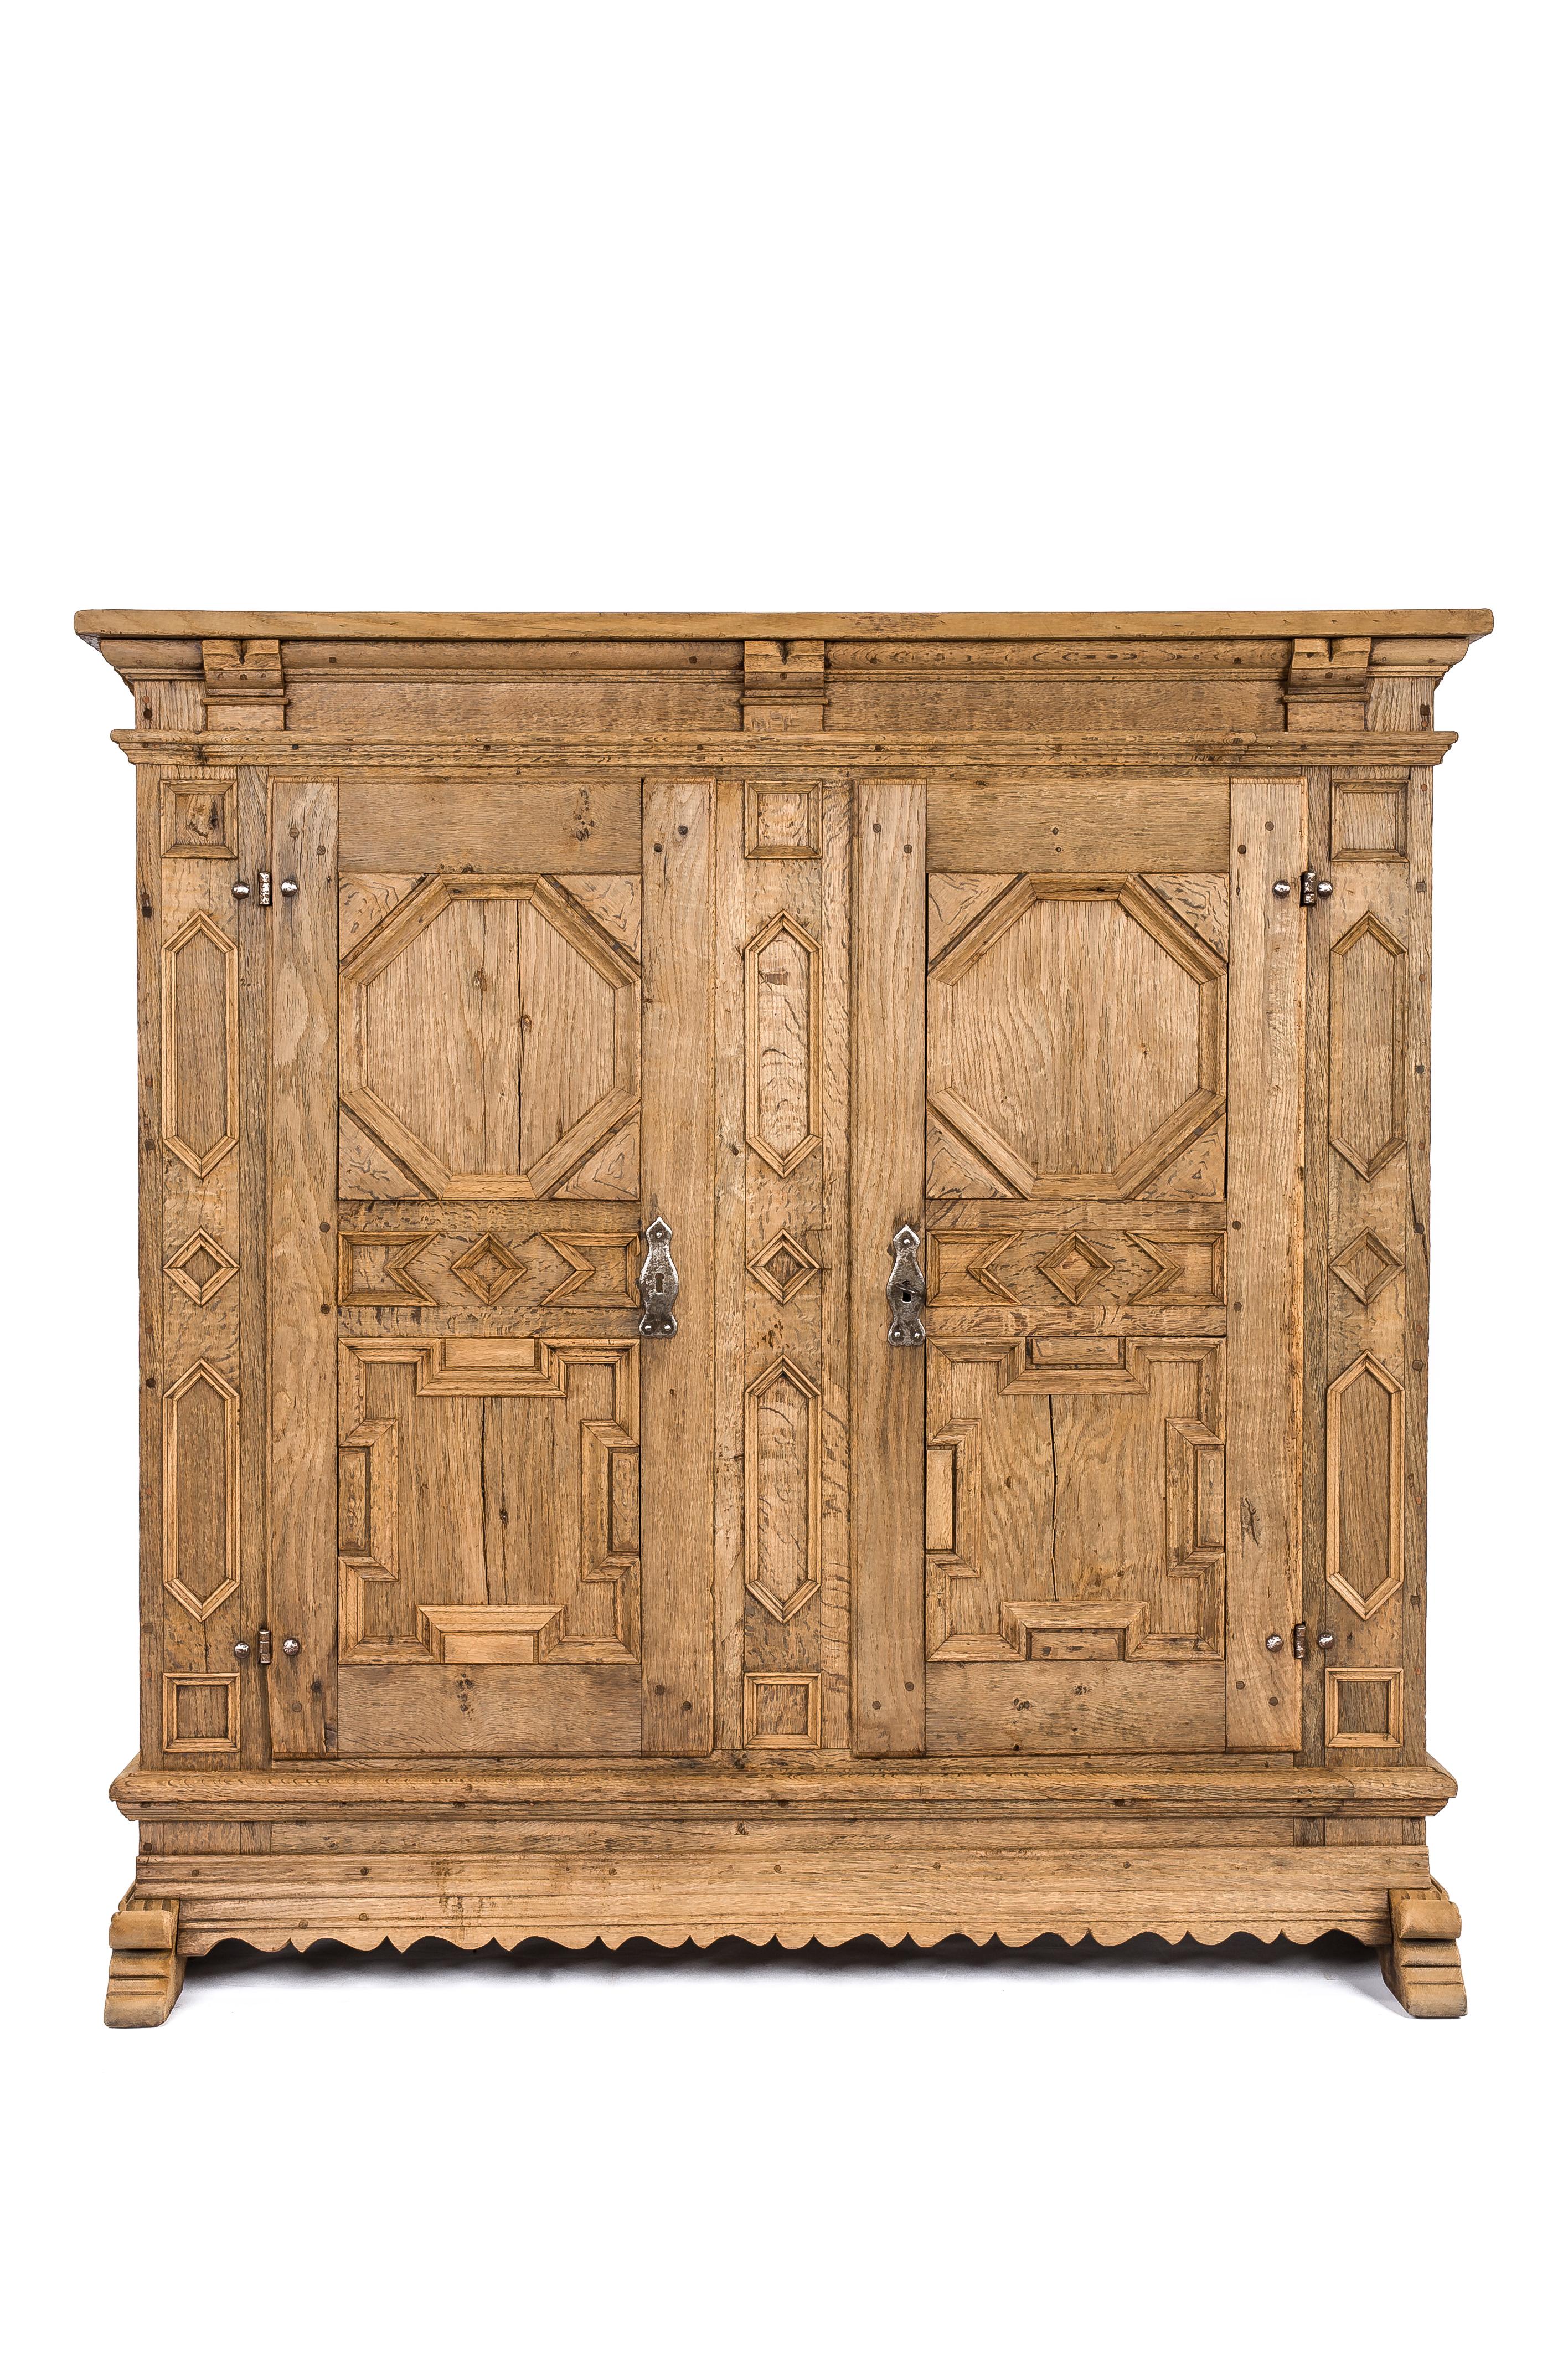 A beautiful 18th-century German baroque armoire or cabinet with two doors. It was made from solid European summer oak to last for generations, it features an intricate geometric design and spacious storage inside. It originates in the region